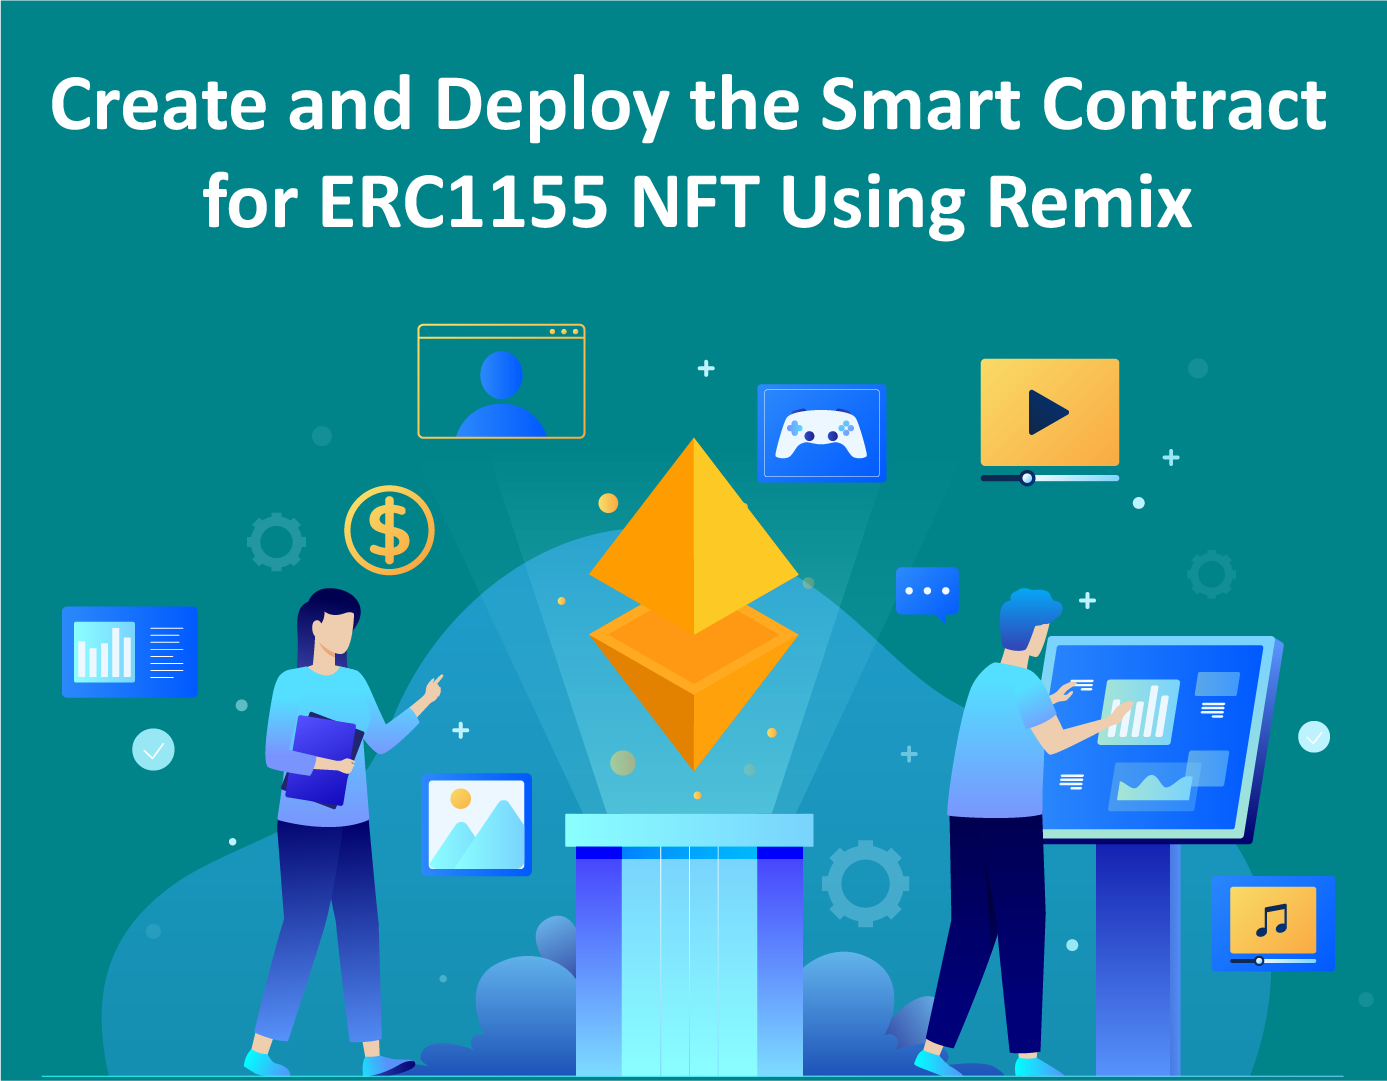 A visually appealing thumbnail representing the topic of the blog post, showcasing elements related to ERC1155 NFT smart contracts and their creation.